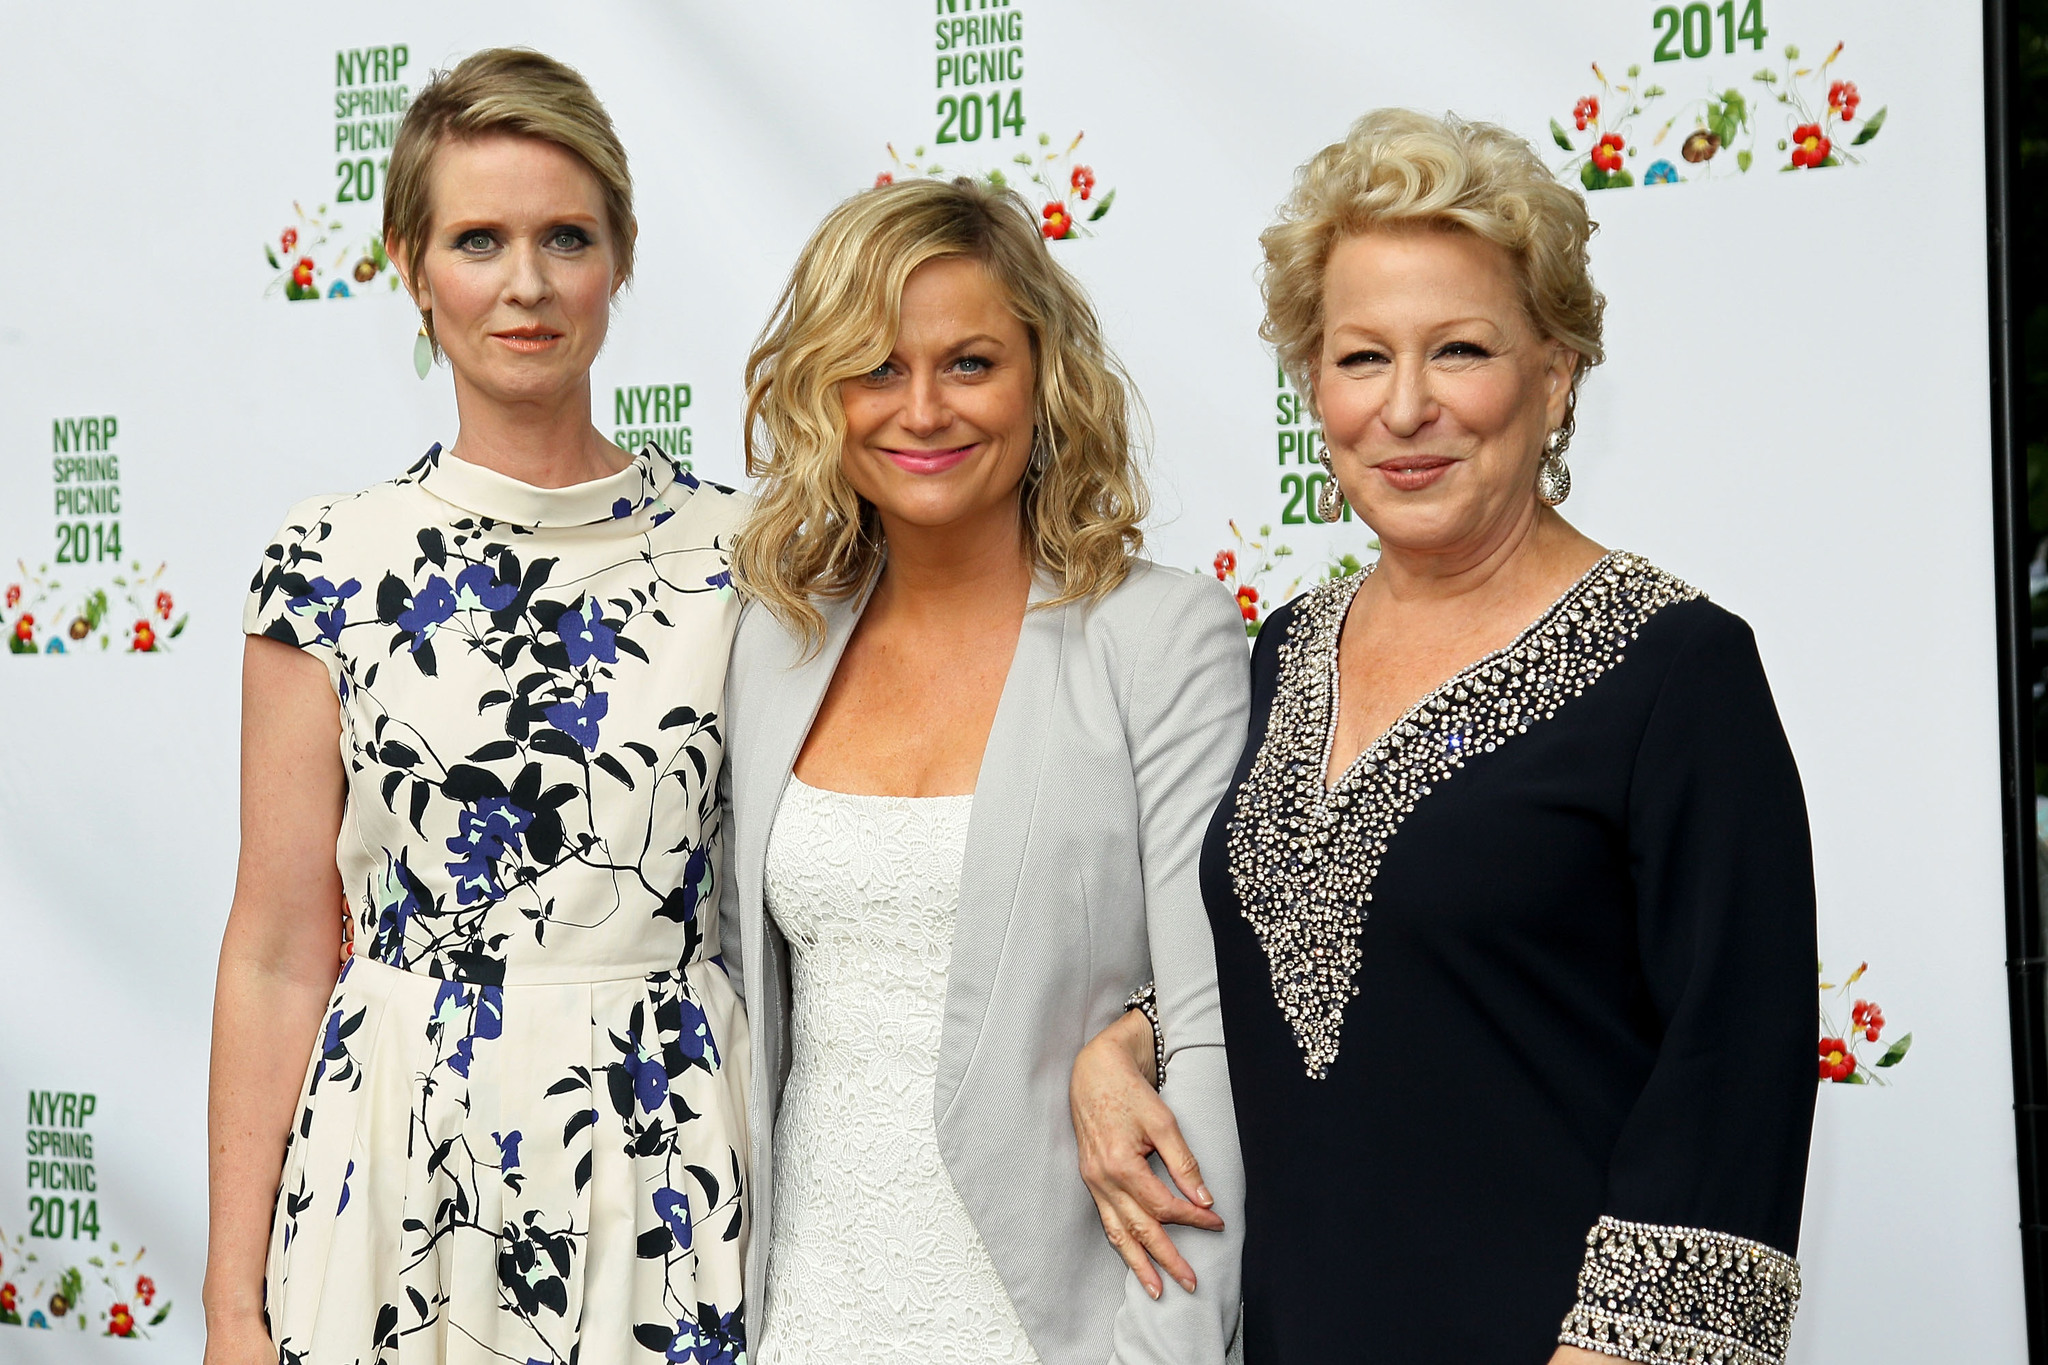 Cynthia Nixon, Amy Poehler and Bette Midler attend Bette Midler's NYRP 13th Annual Spring Picnic at General Grant National Memorial on May 29, 2014 in New York City.